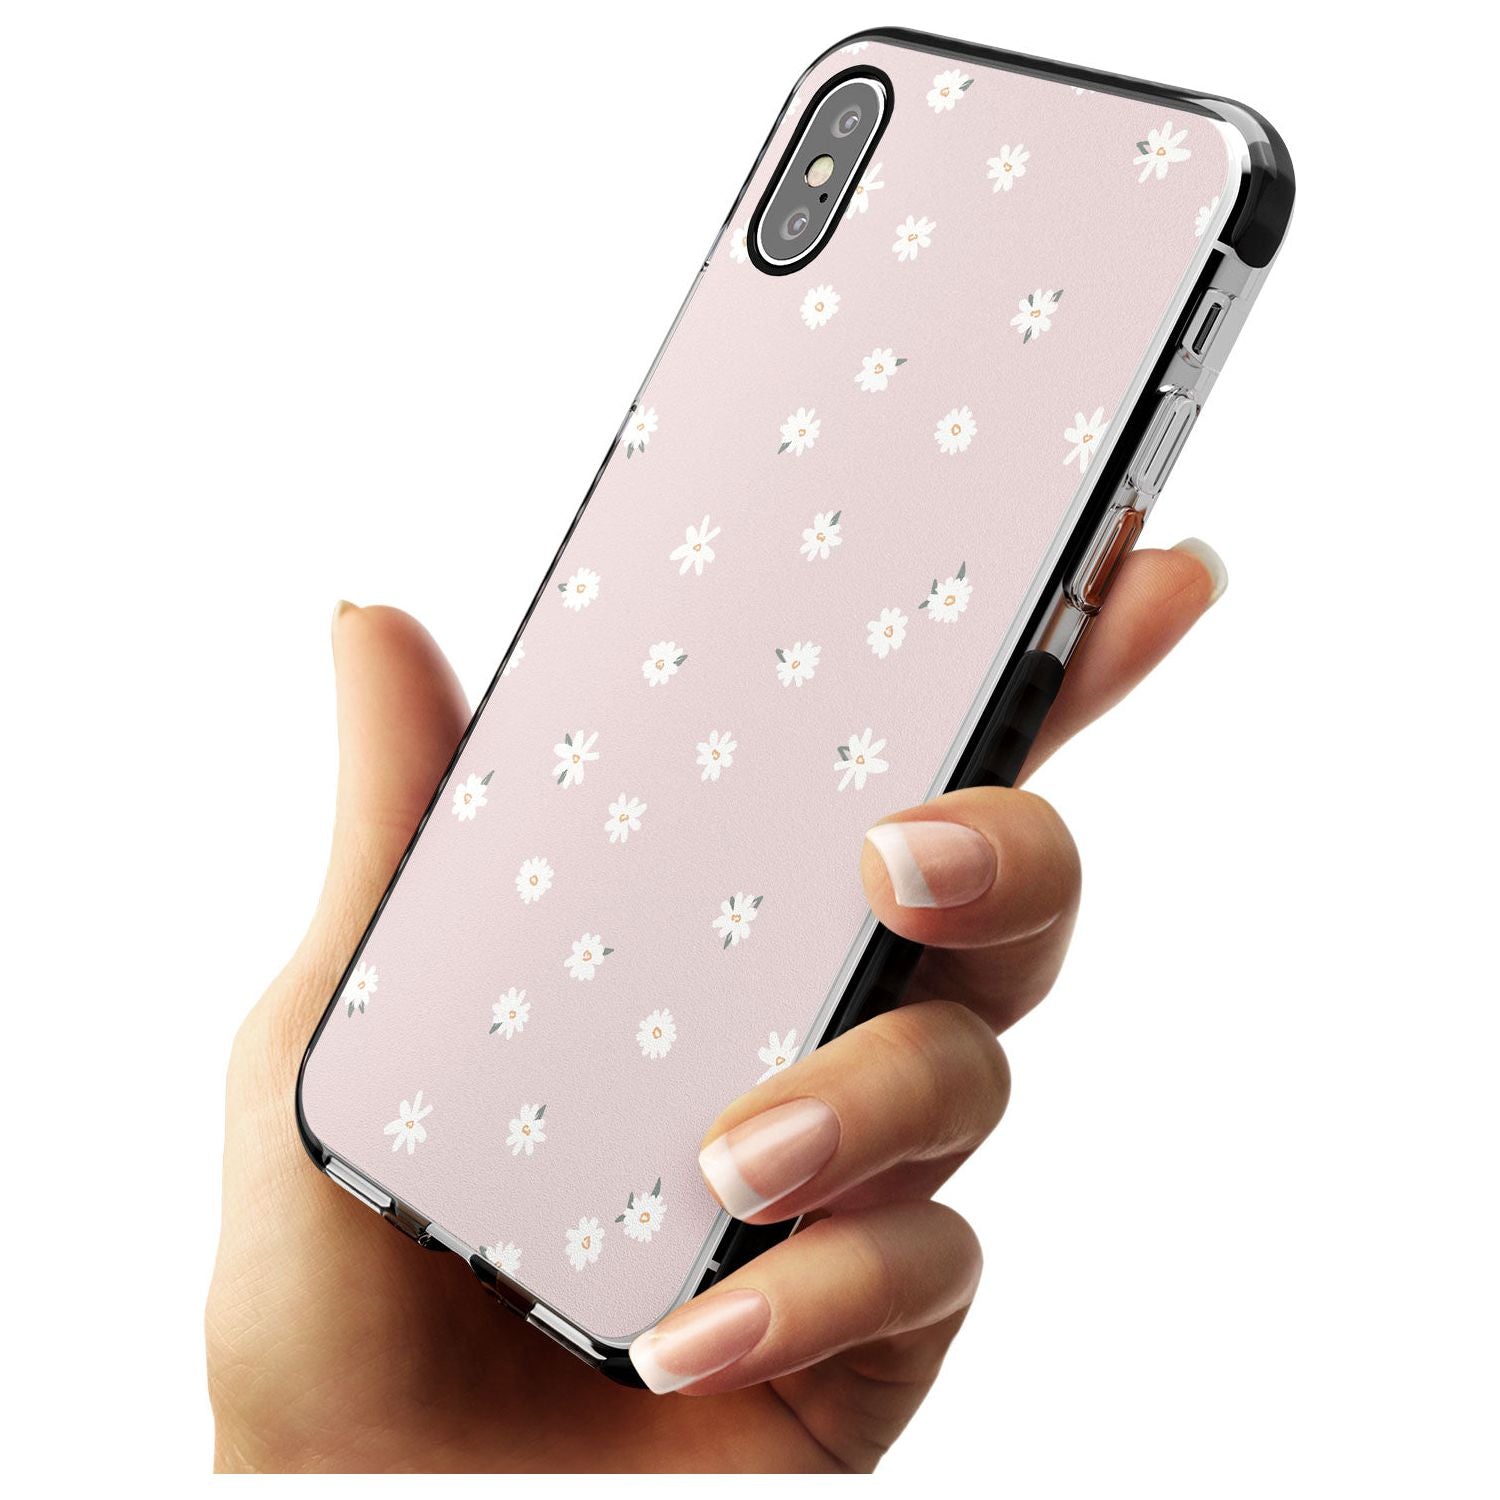 Painted Daises on Pink - Cute Floral Daisy Design Pink Fade Impact Phone Case for iPhone X XS Max XR